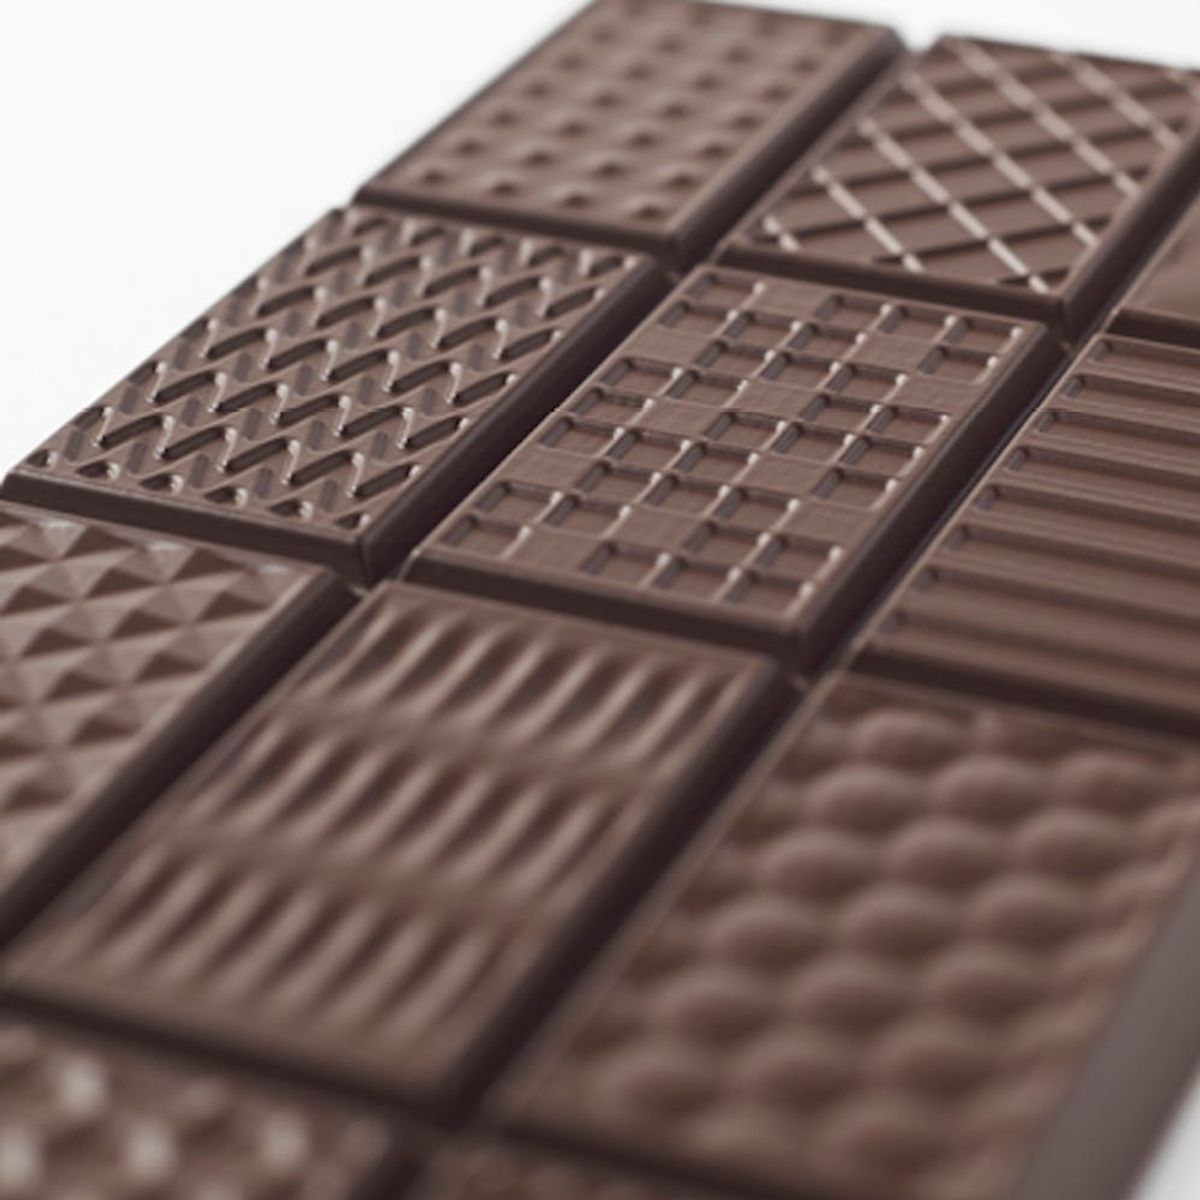 This Textured Bar Will Change Your Chocolate Experience